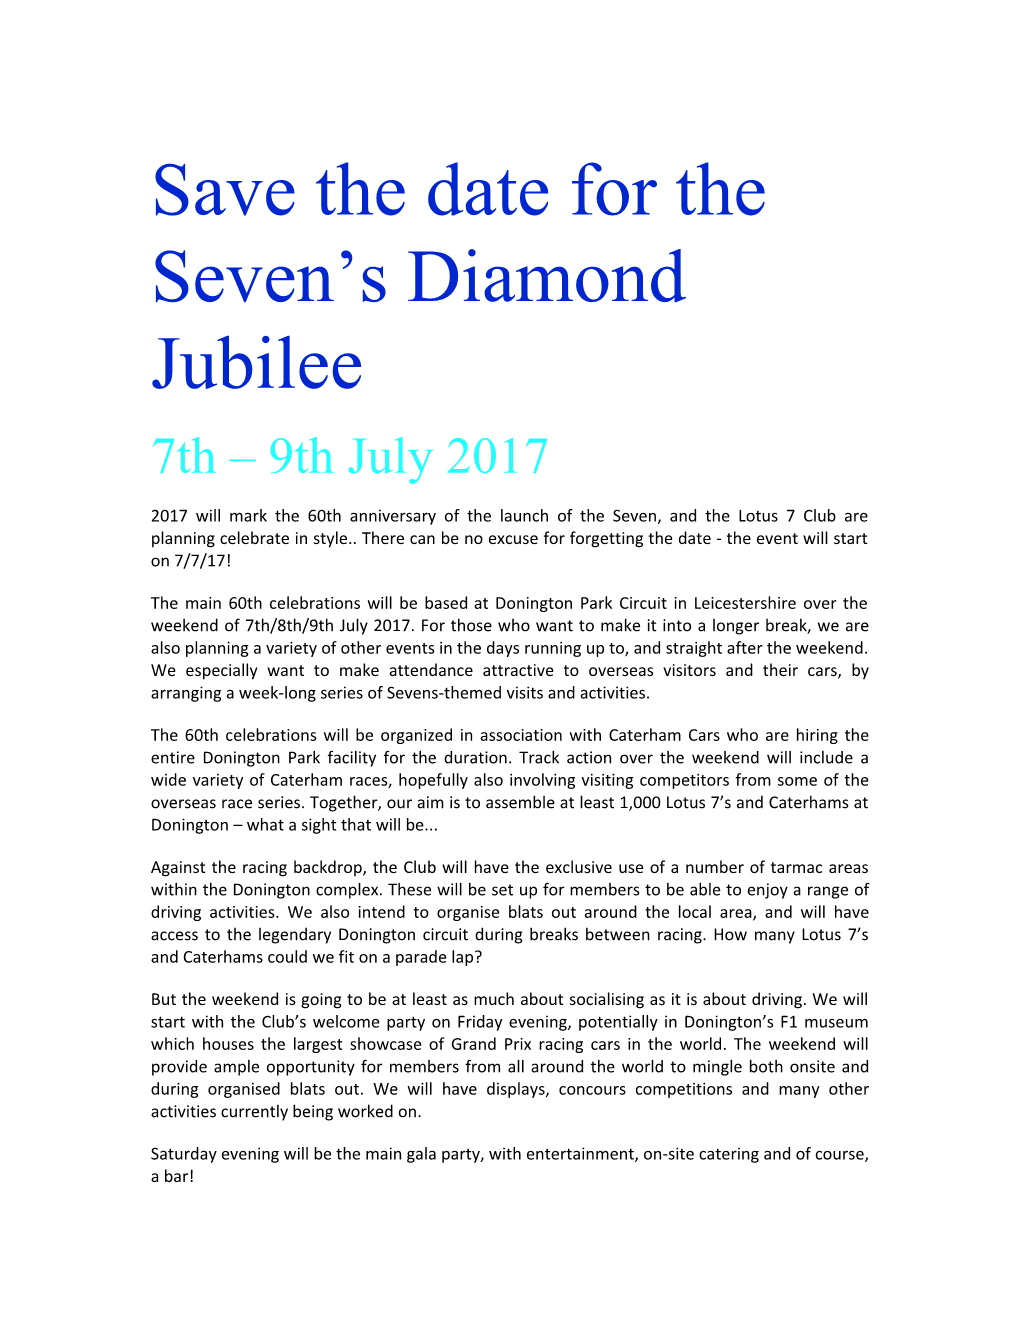 Save the Date for the Seven S Diamond Jubilee